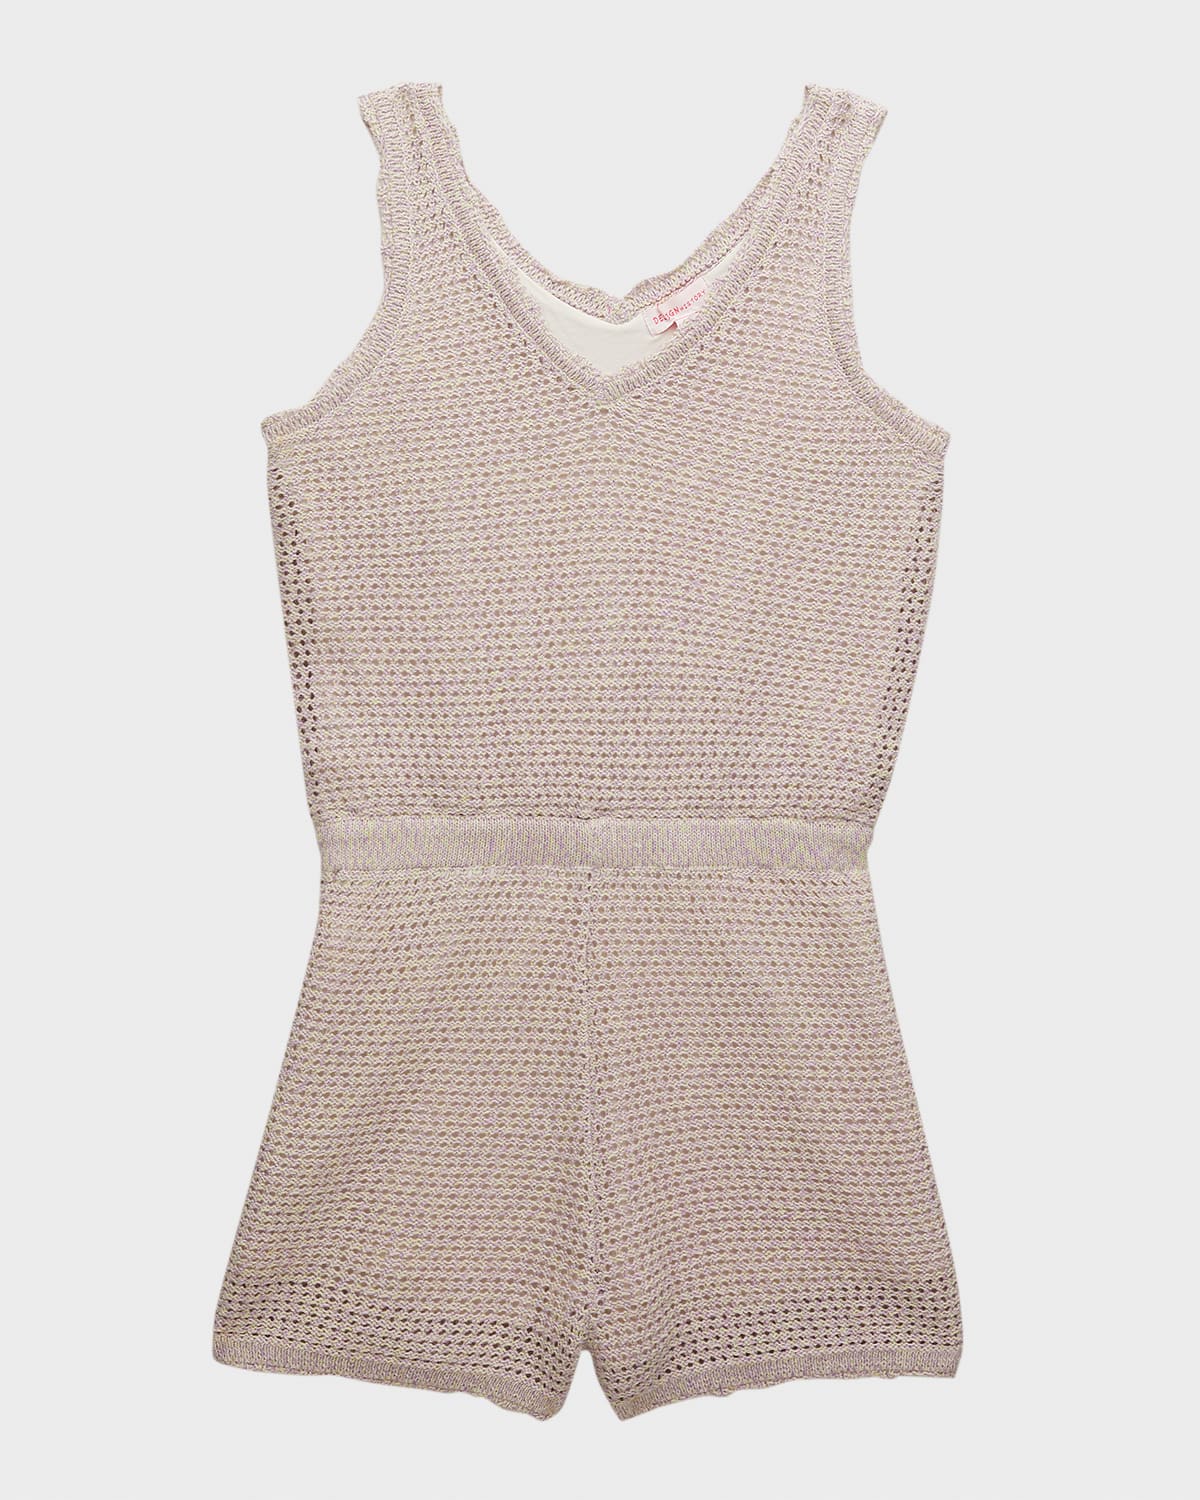 Girl's Marled Romper, Size S-XL